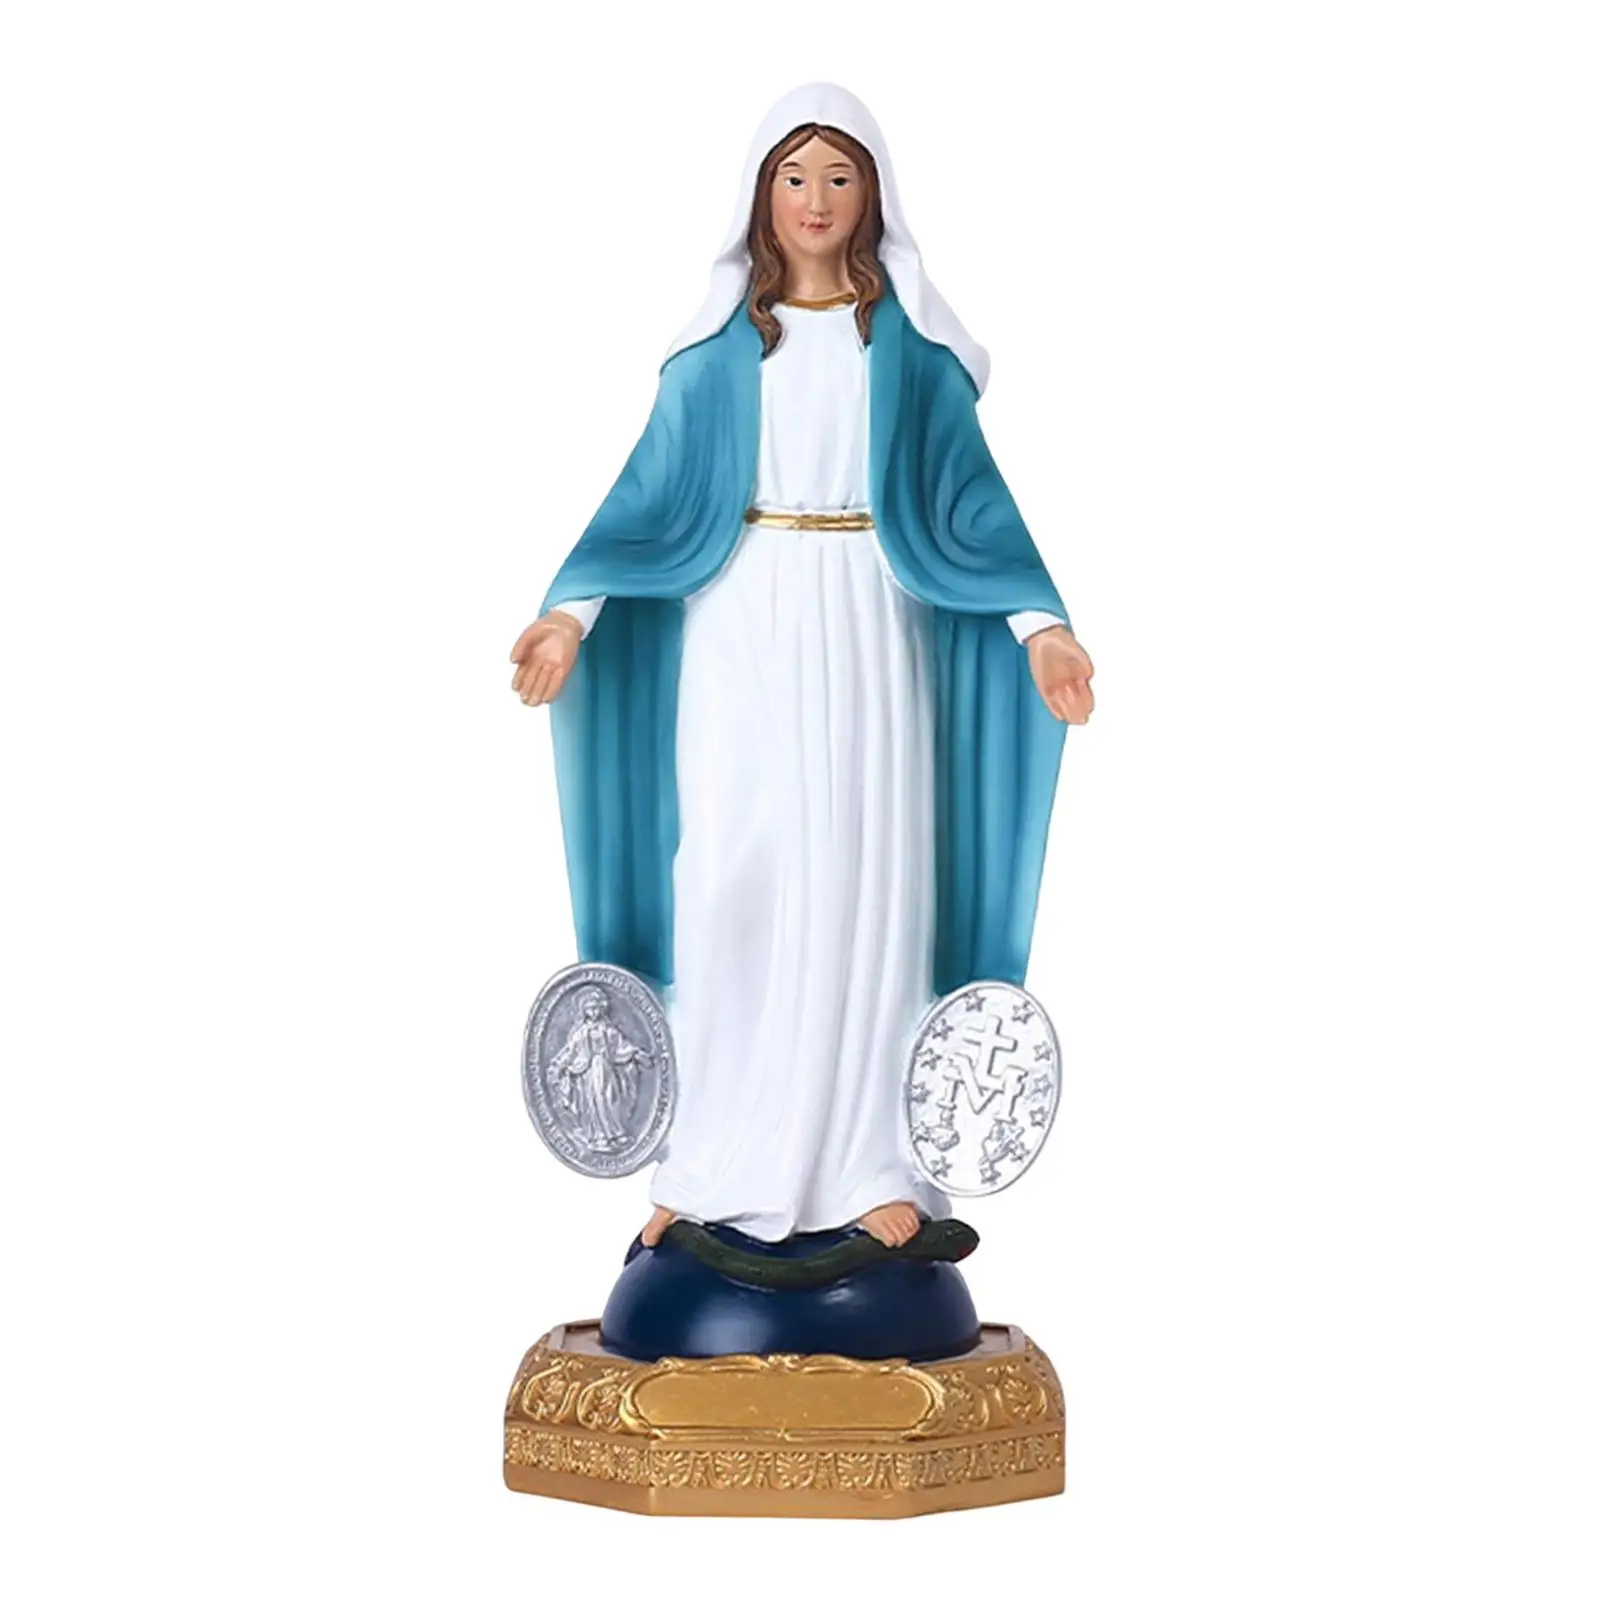 Virgin Mary Statue 8 inch Resin Figurine Our Lady of Grace for Bookcase Desk Office Decoration